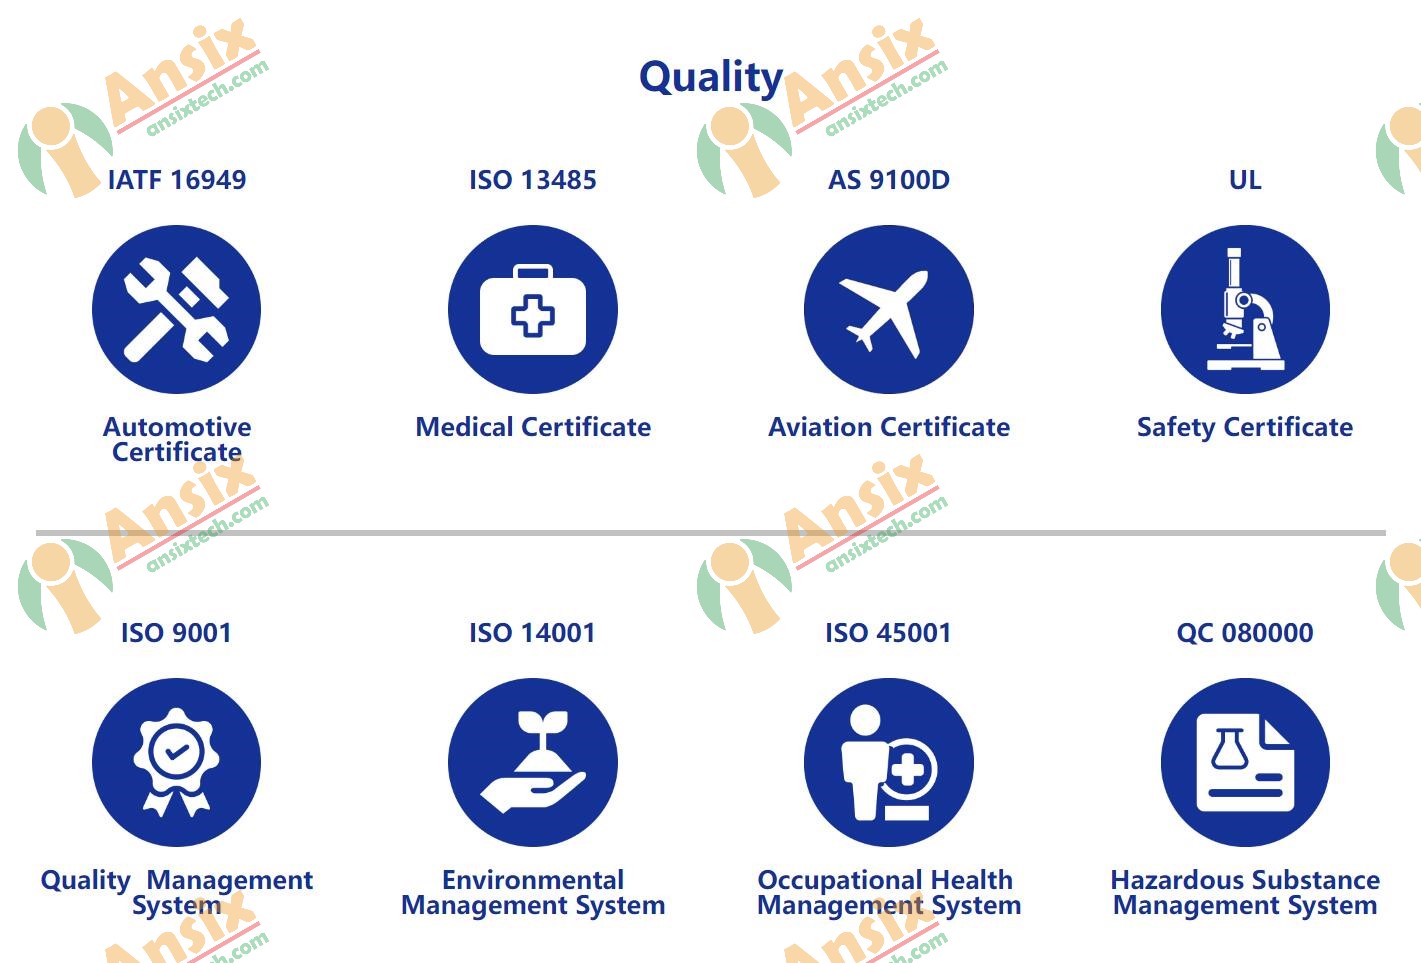 QUALITY SYSTEM CERTIFICATE 1iyu